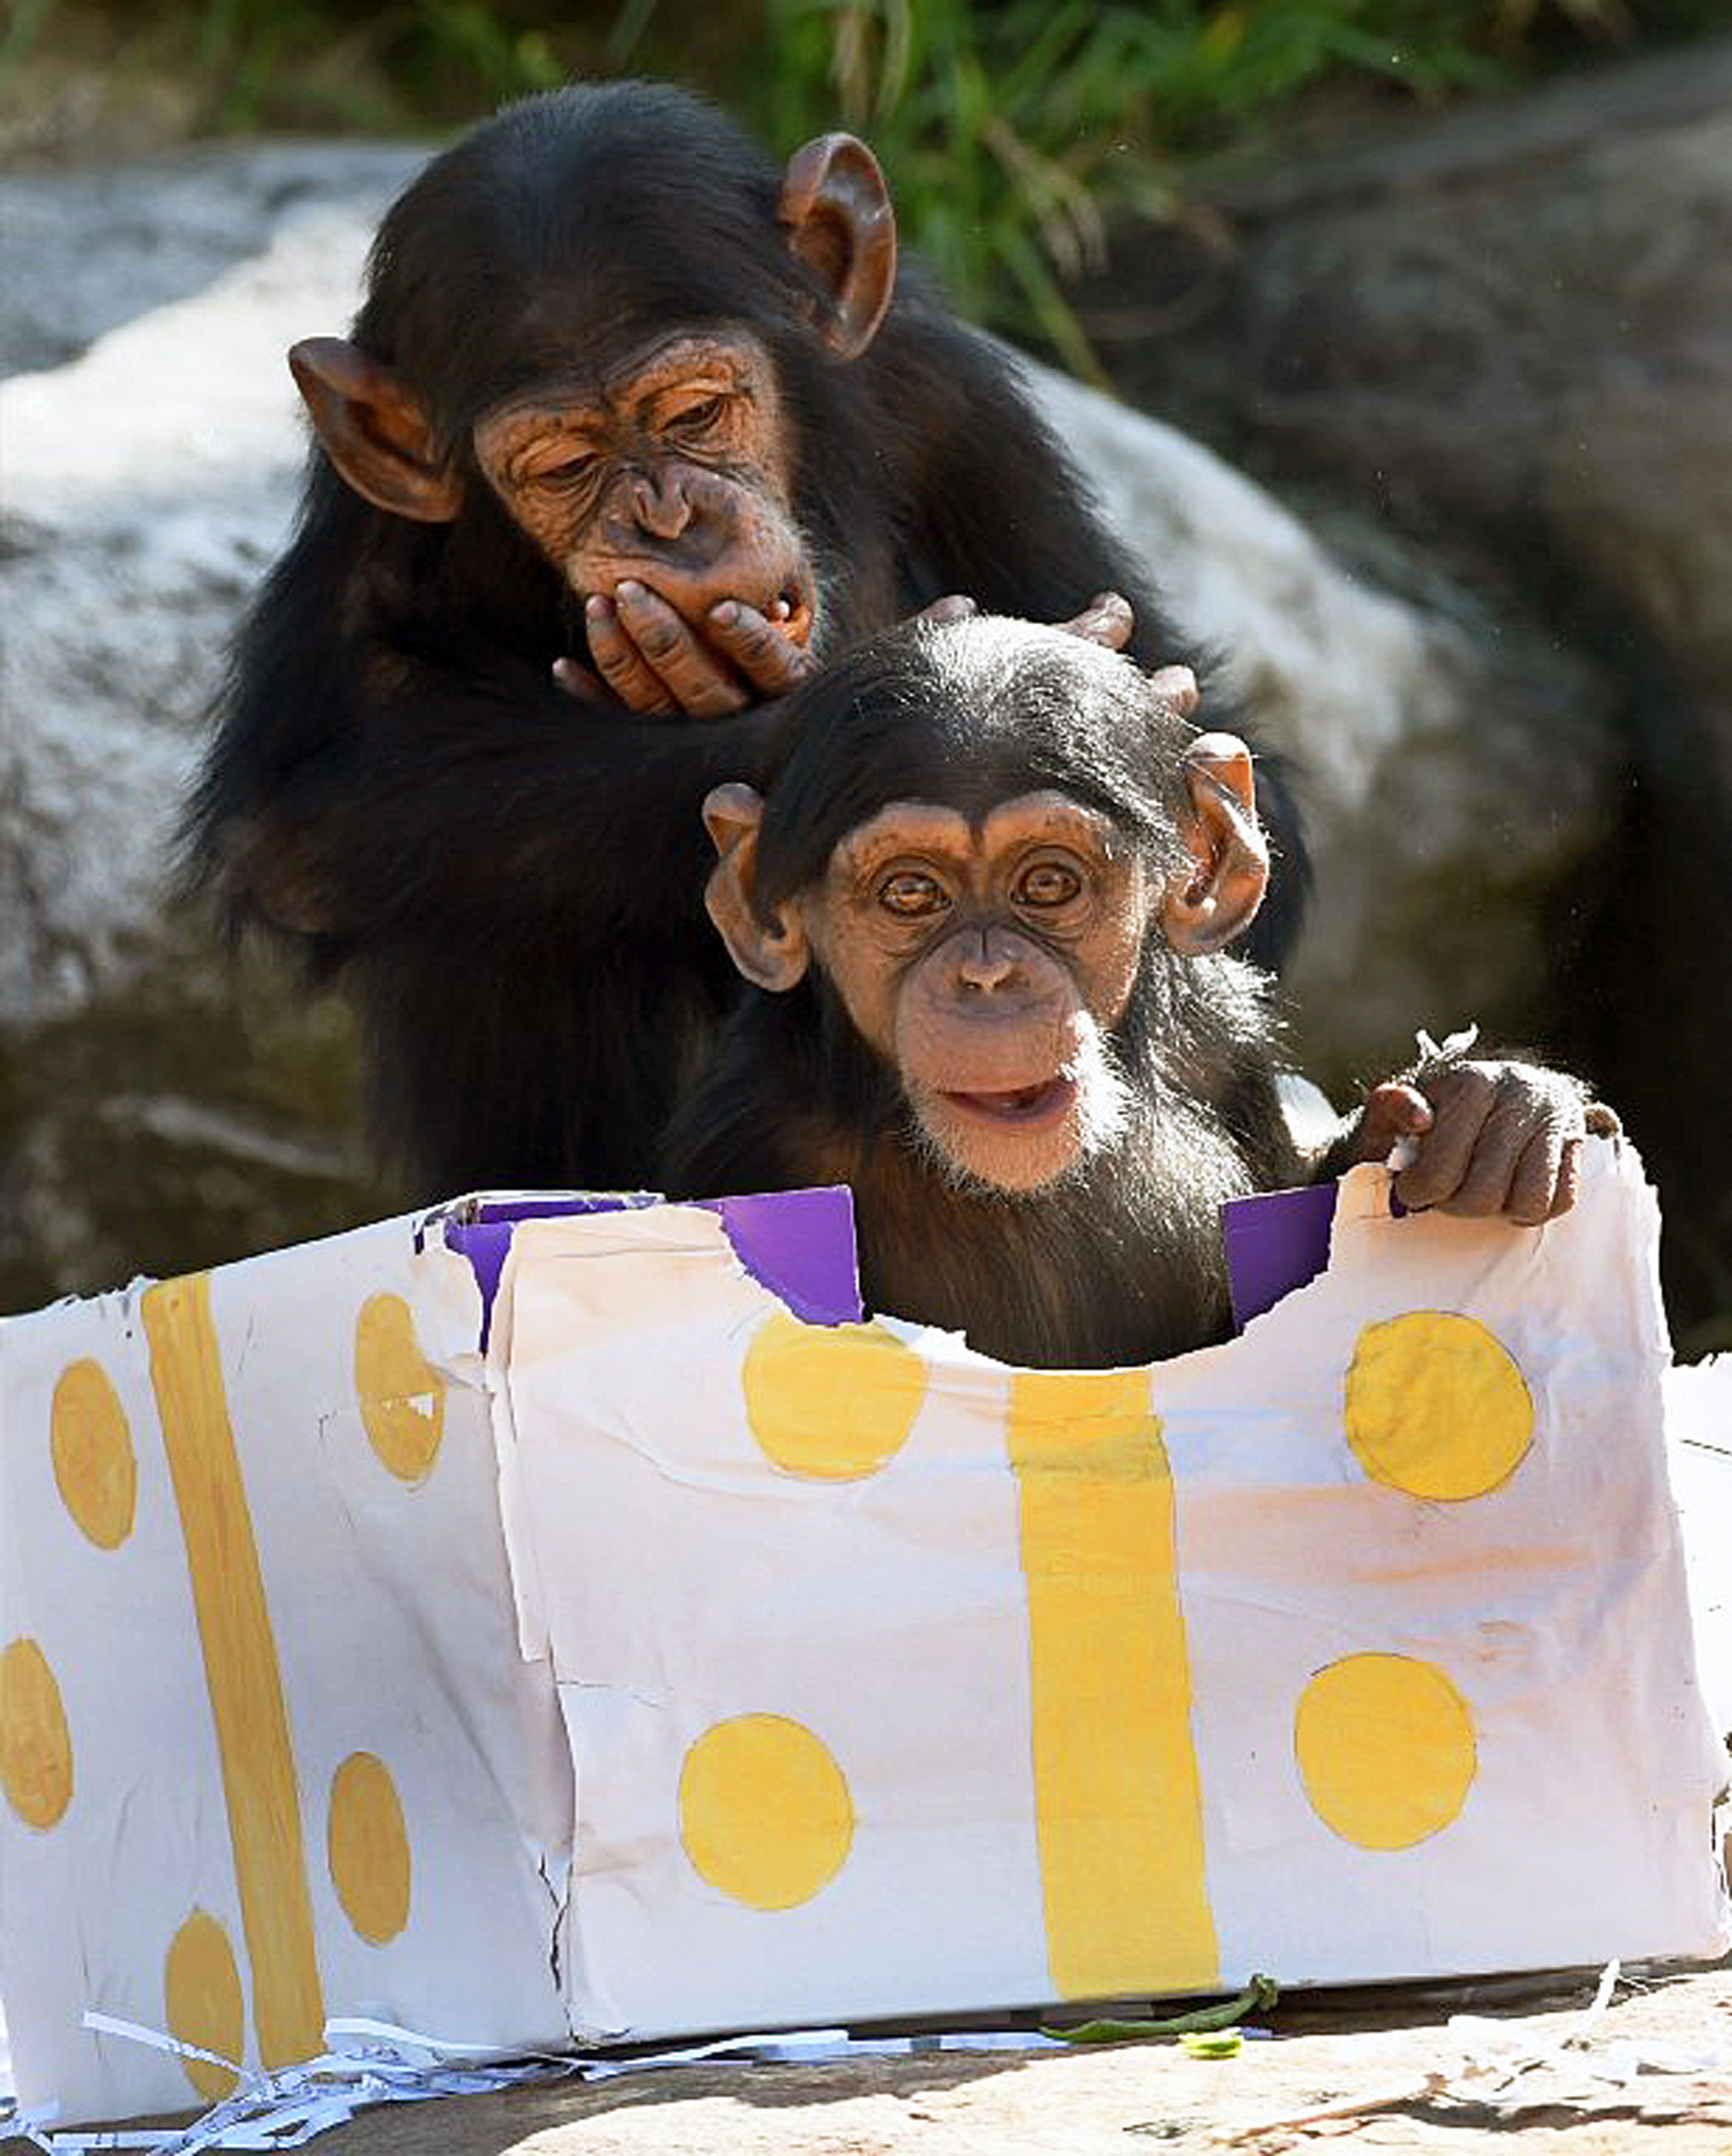 Taronga Zoo's baby chimpanzees play with their Christmas treats in Sydney on Dec. 4, 2015.